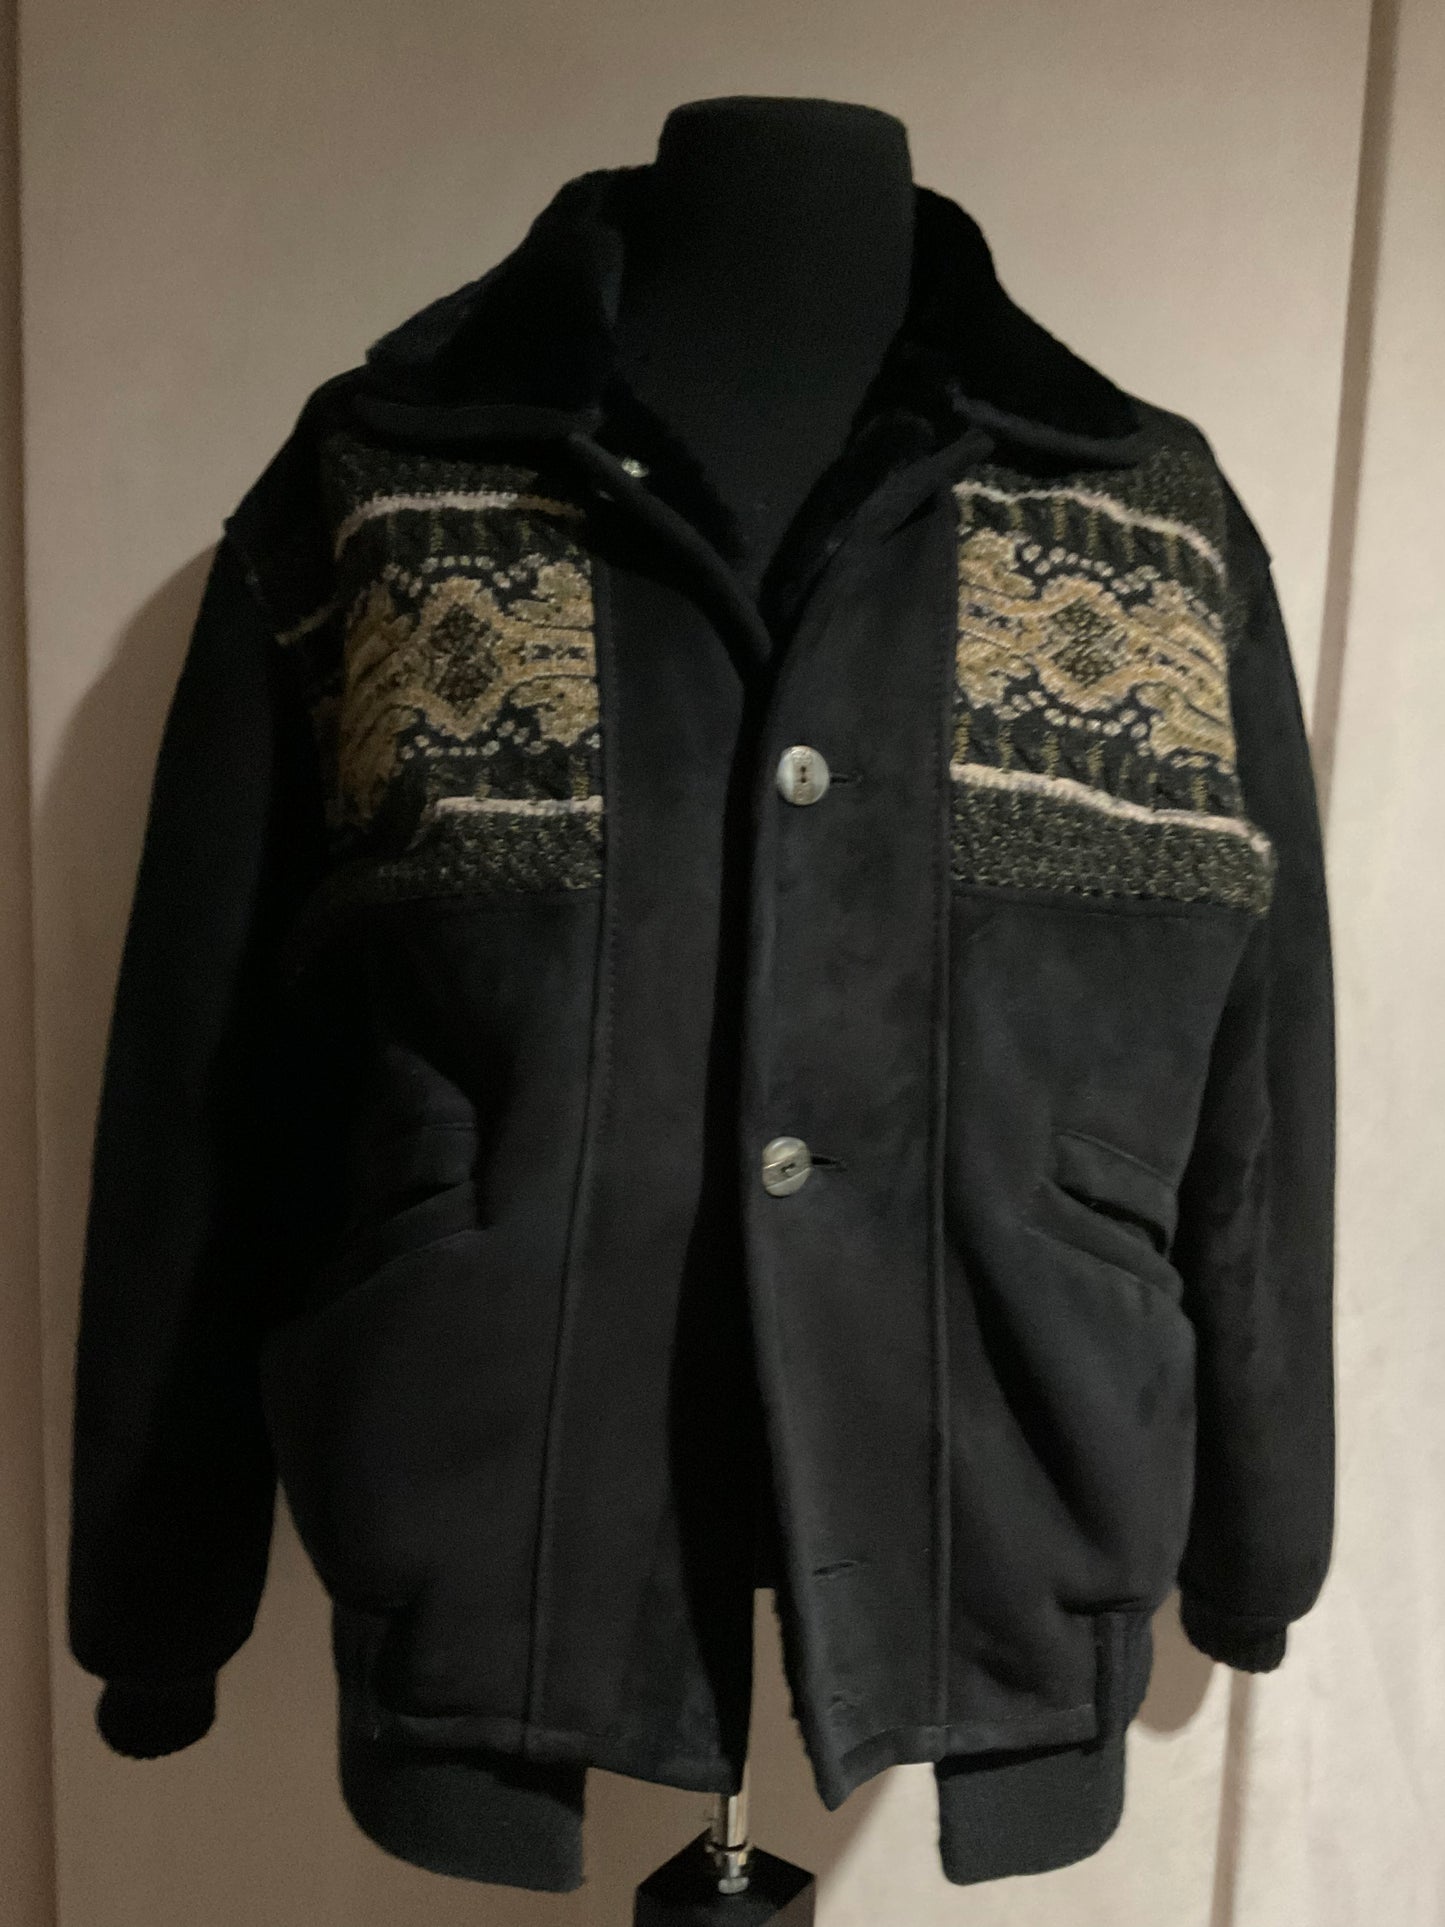 R P COAT / SHEARLING & KNIT / BLACK / NEW / MEDIUM - LARGE / MADE IN ITALY